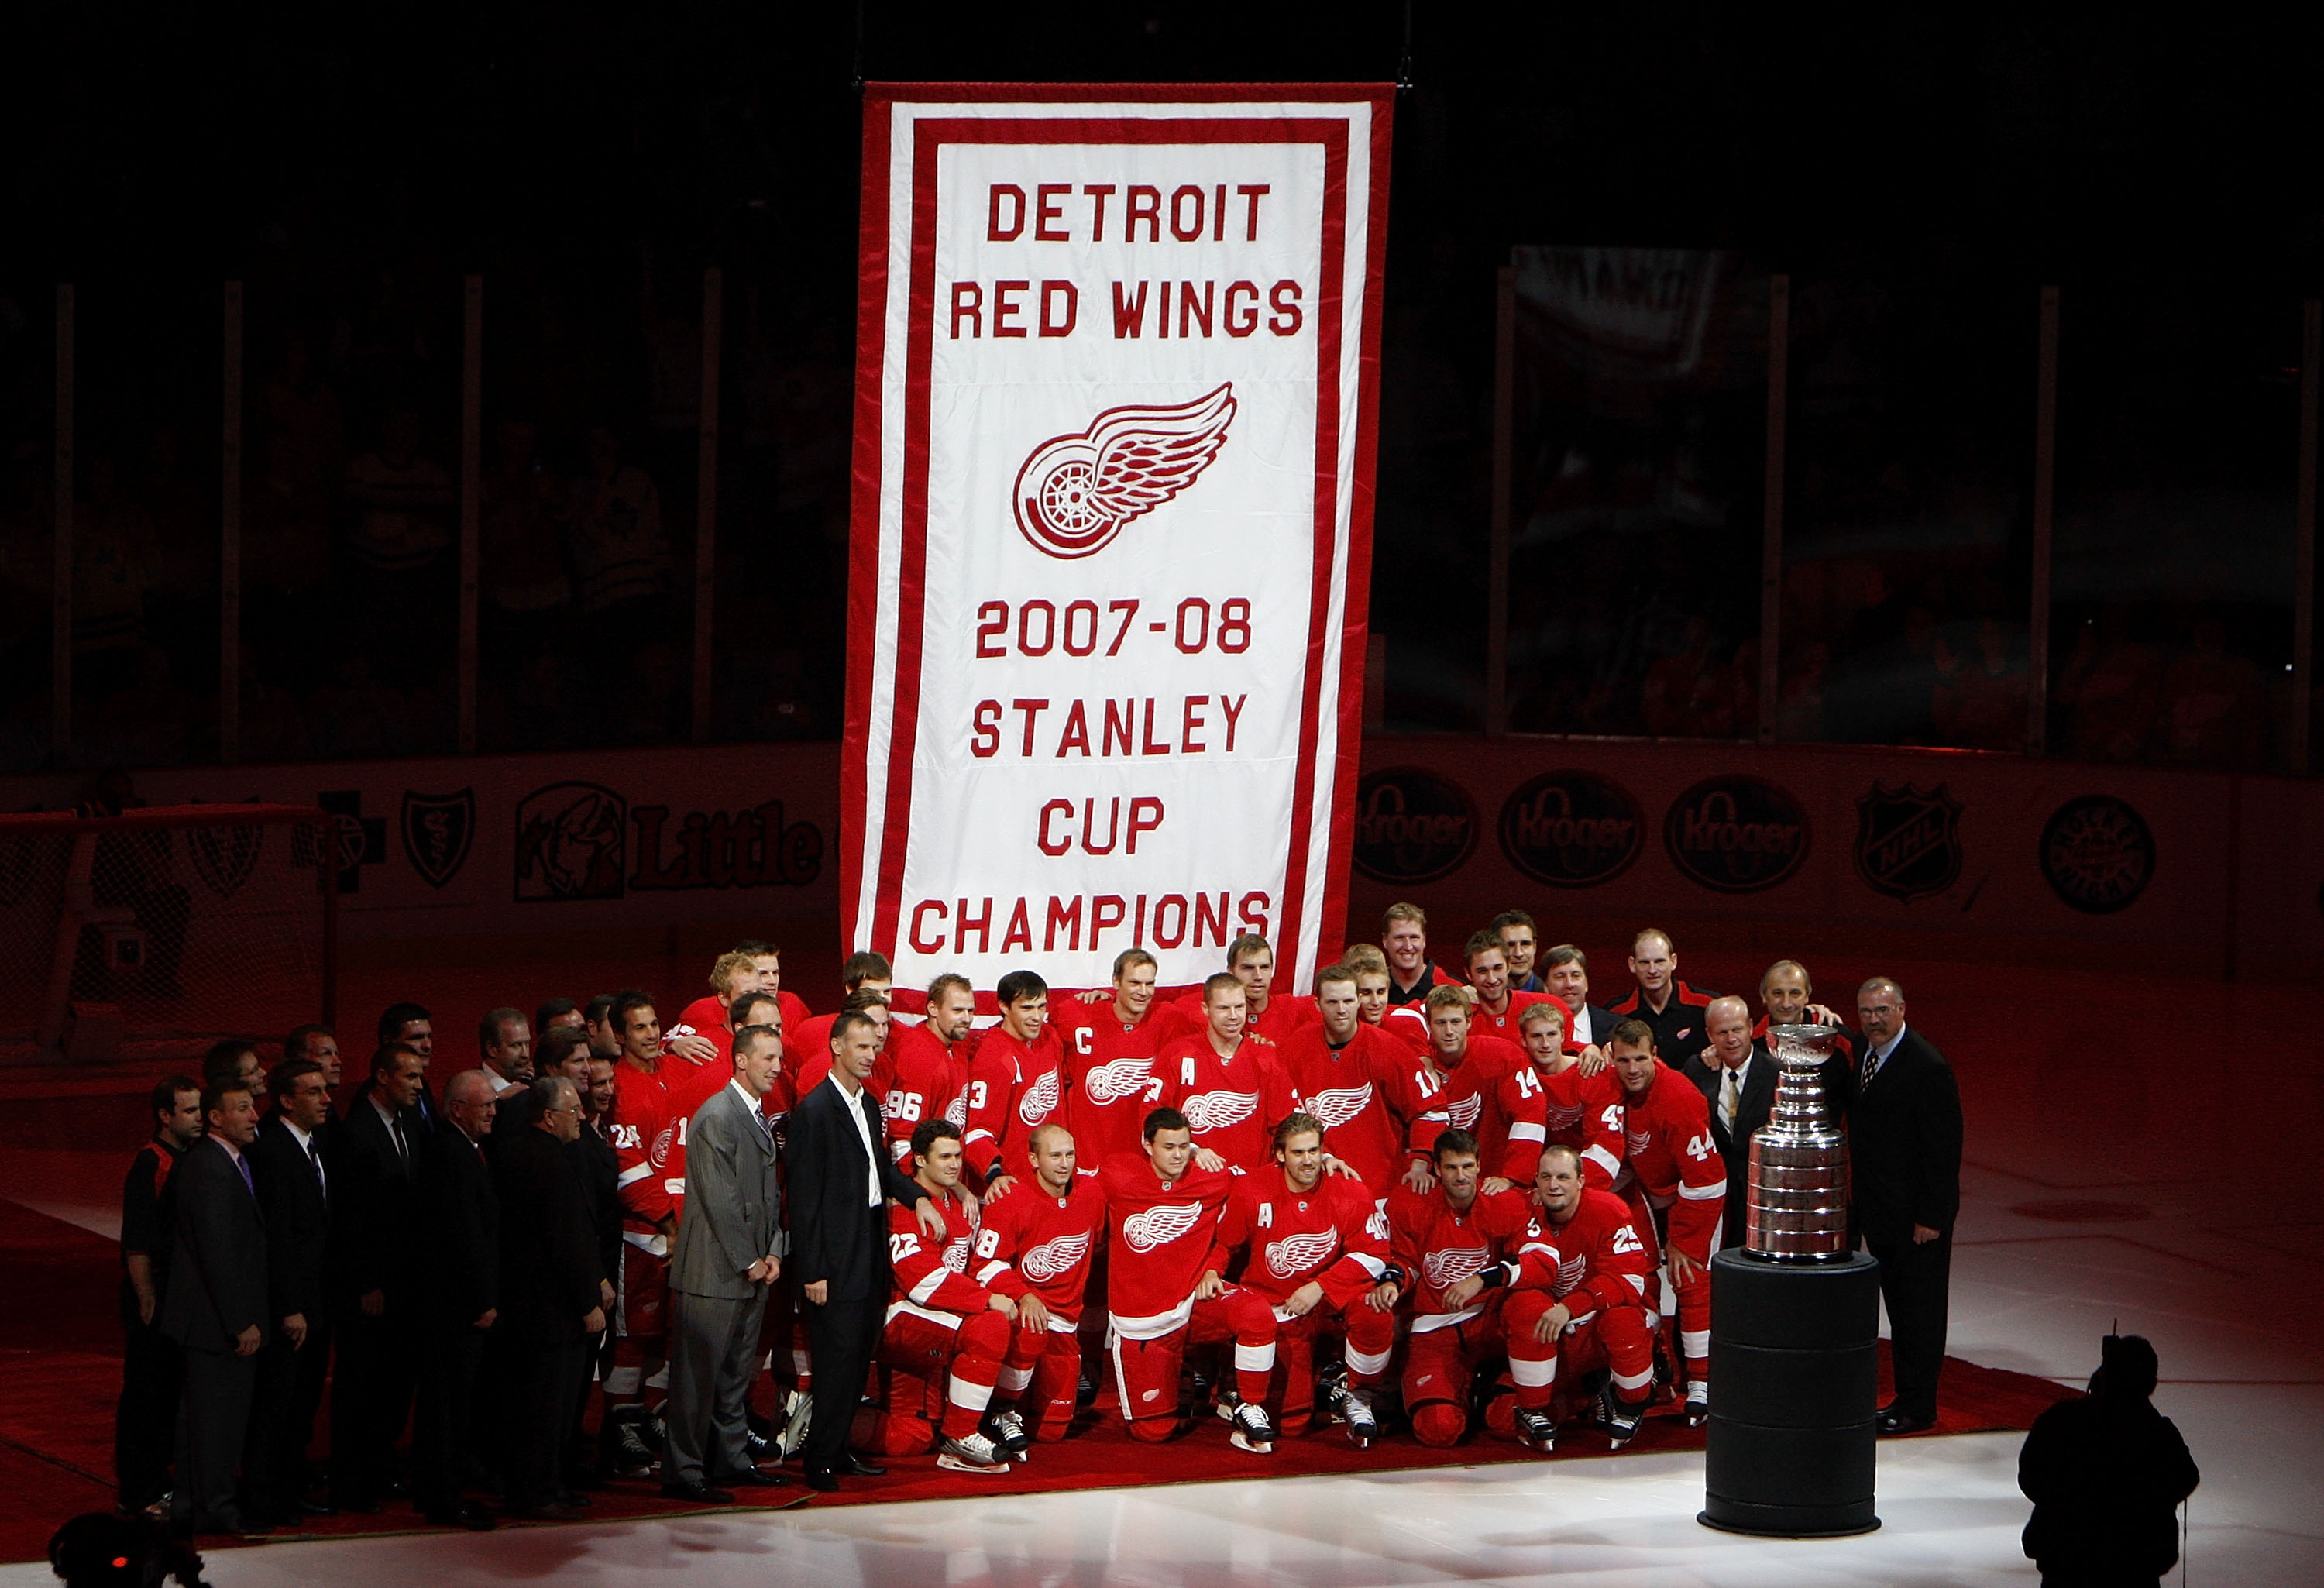 DETROIT - OCTOBER 09:  Members of the 2007-2008 Detroit Red Wings pose for a photo in front of their Stanley Cup championship banner prior to playing the Toronto Maple Leafs on October 9, 2008 at Joe Louis Arena in Detroit, Michigan.  (Photo by Gregory Sh